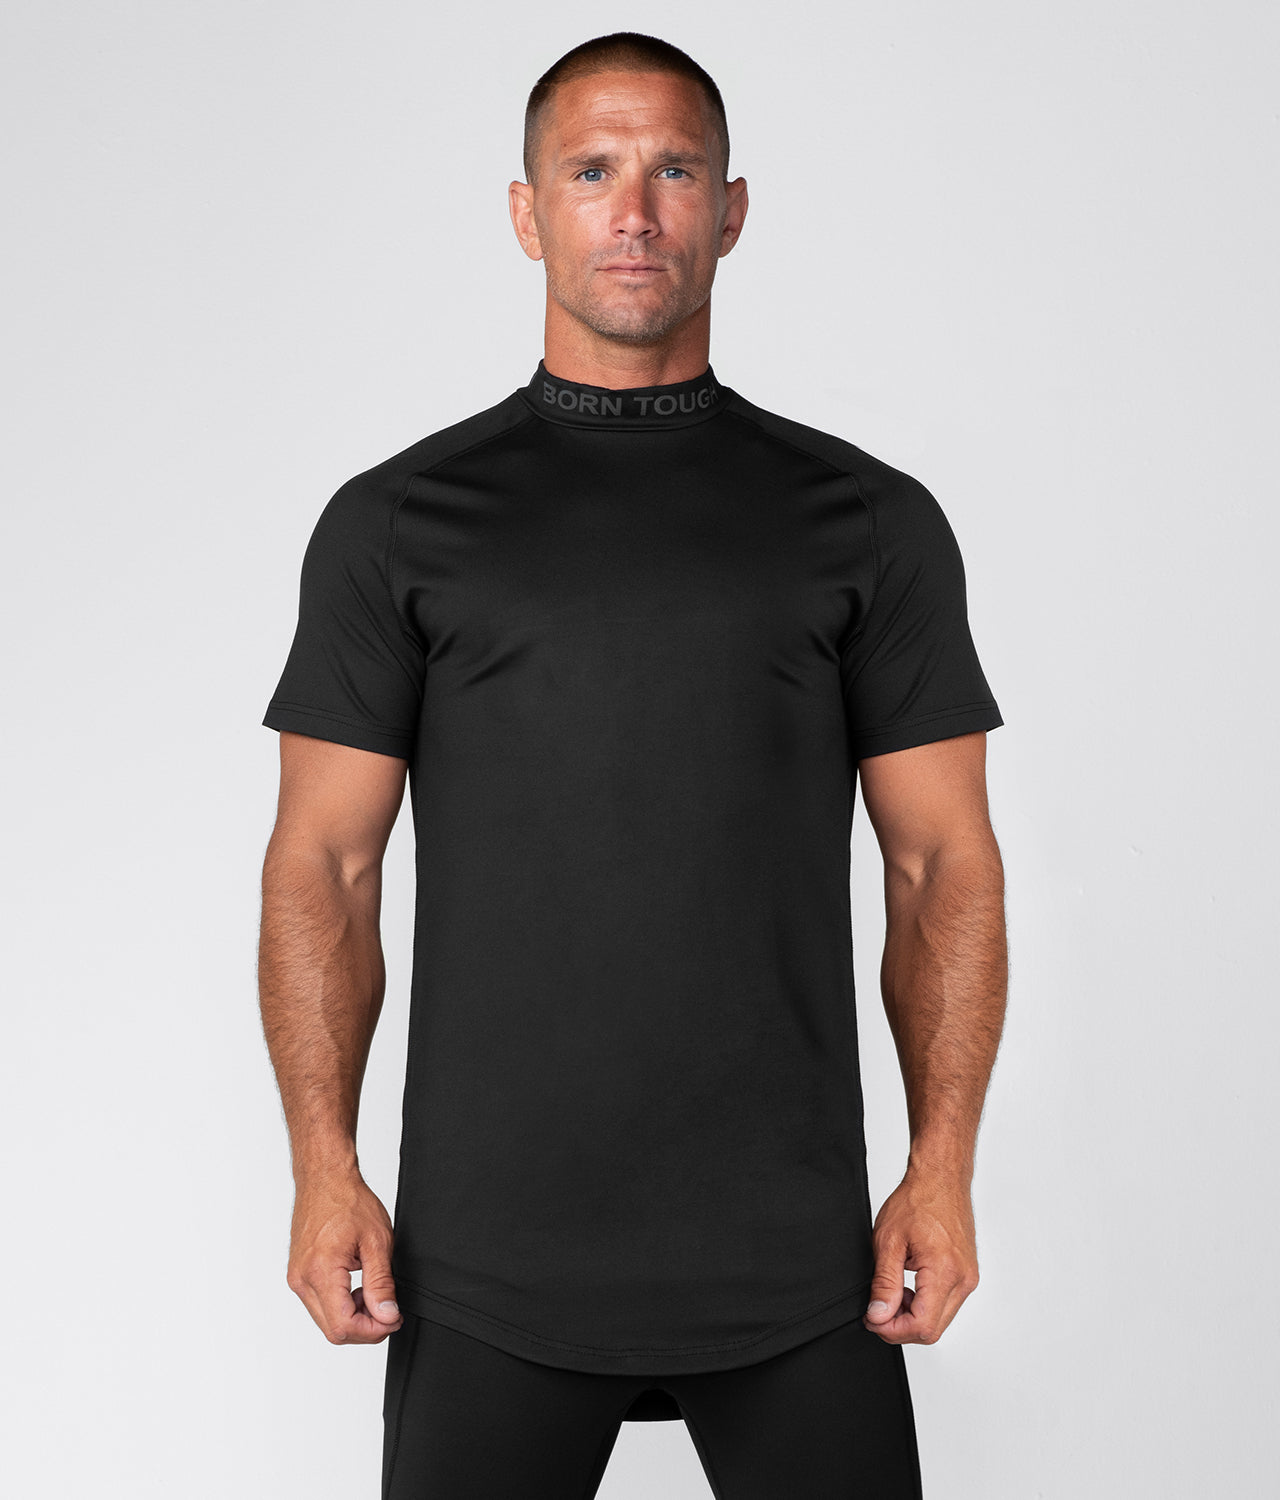 mens compression shirt with muscle padding